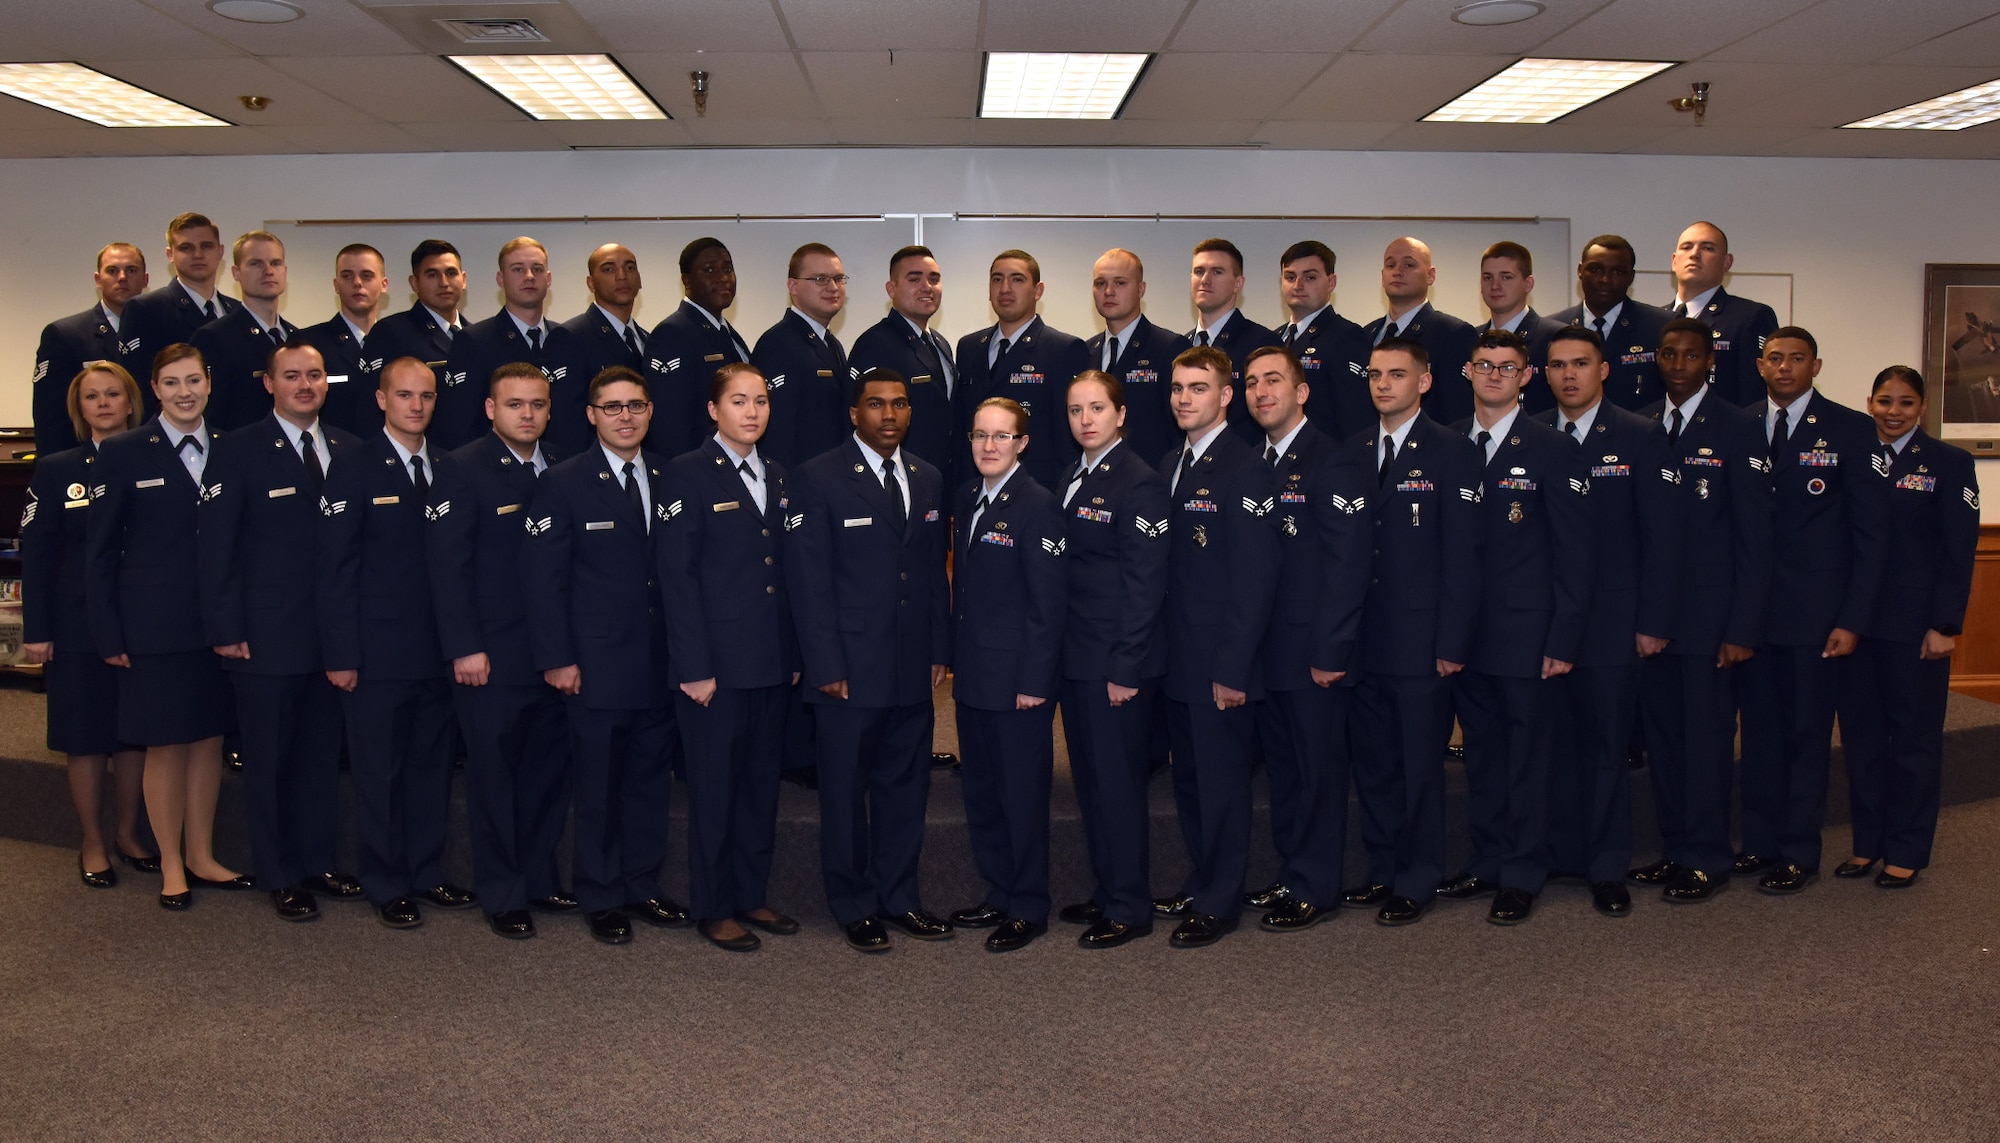 Students and instructors of Airman Leadership School Class 19-A stand for a group photo Oct. 17, 2018 at Malmstrom Air Force Base, Mont. (U.S. Air Force photo by Airman 1st Class Jacob M. Thompson)